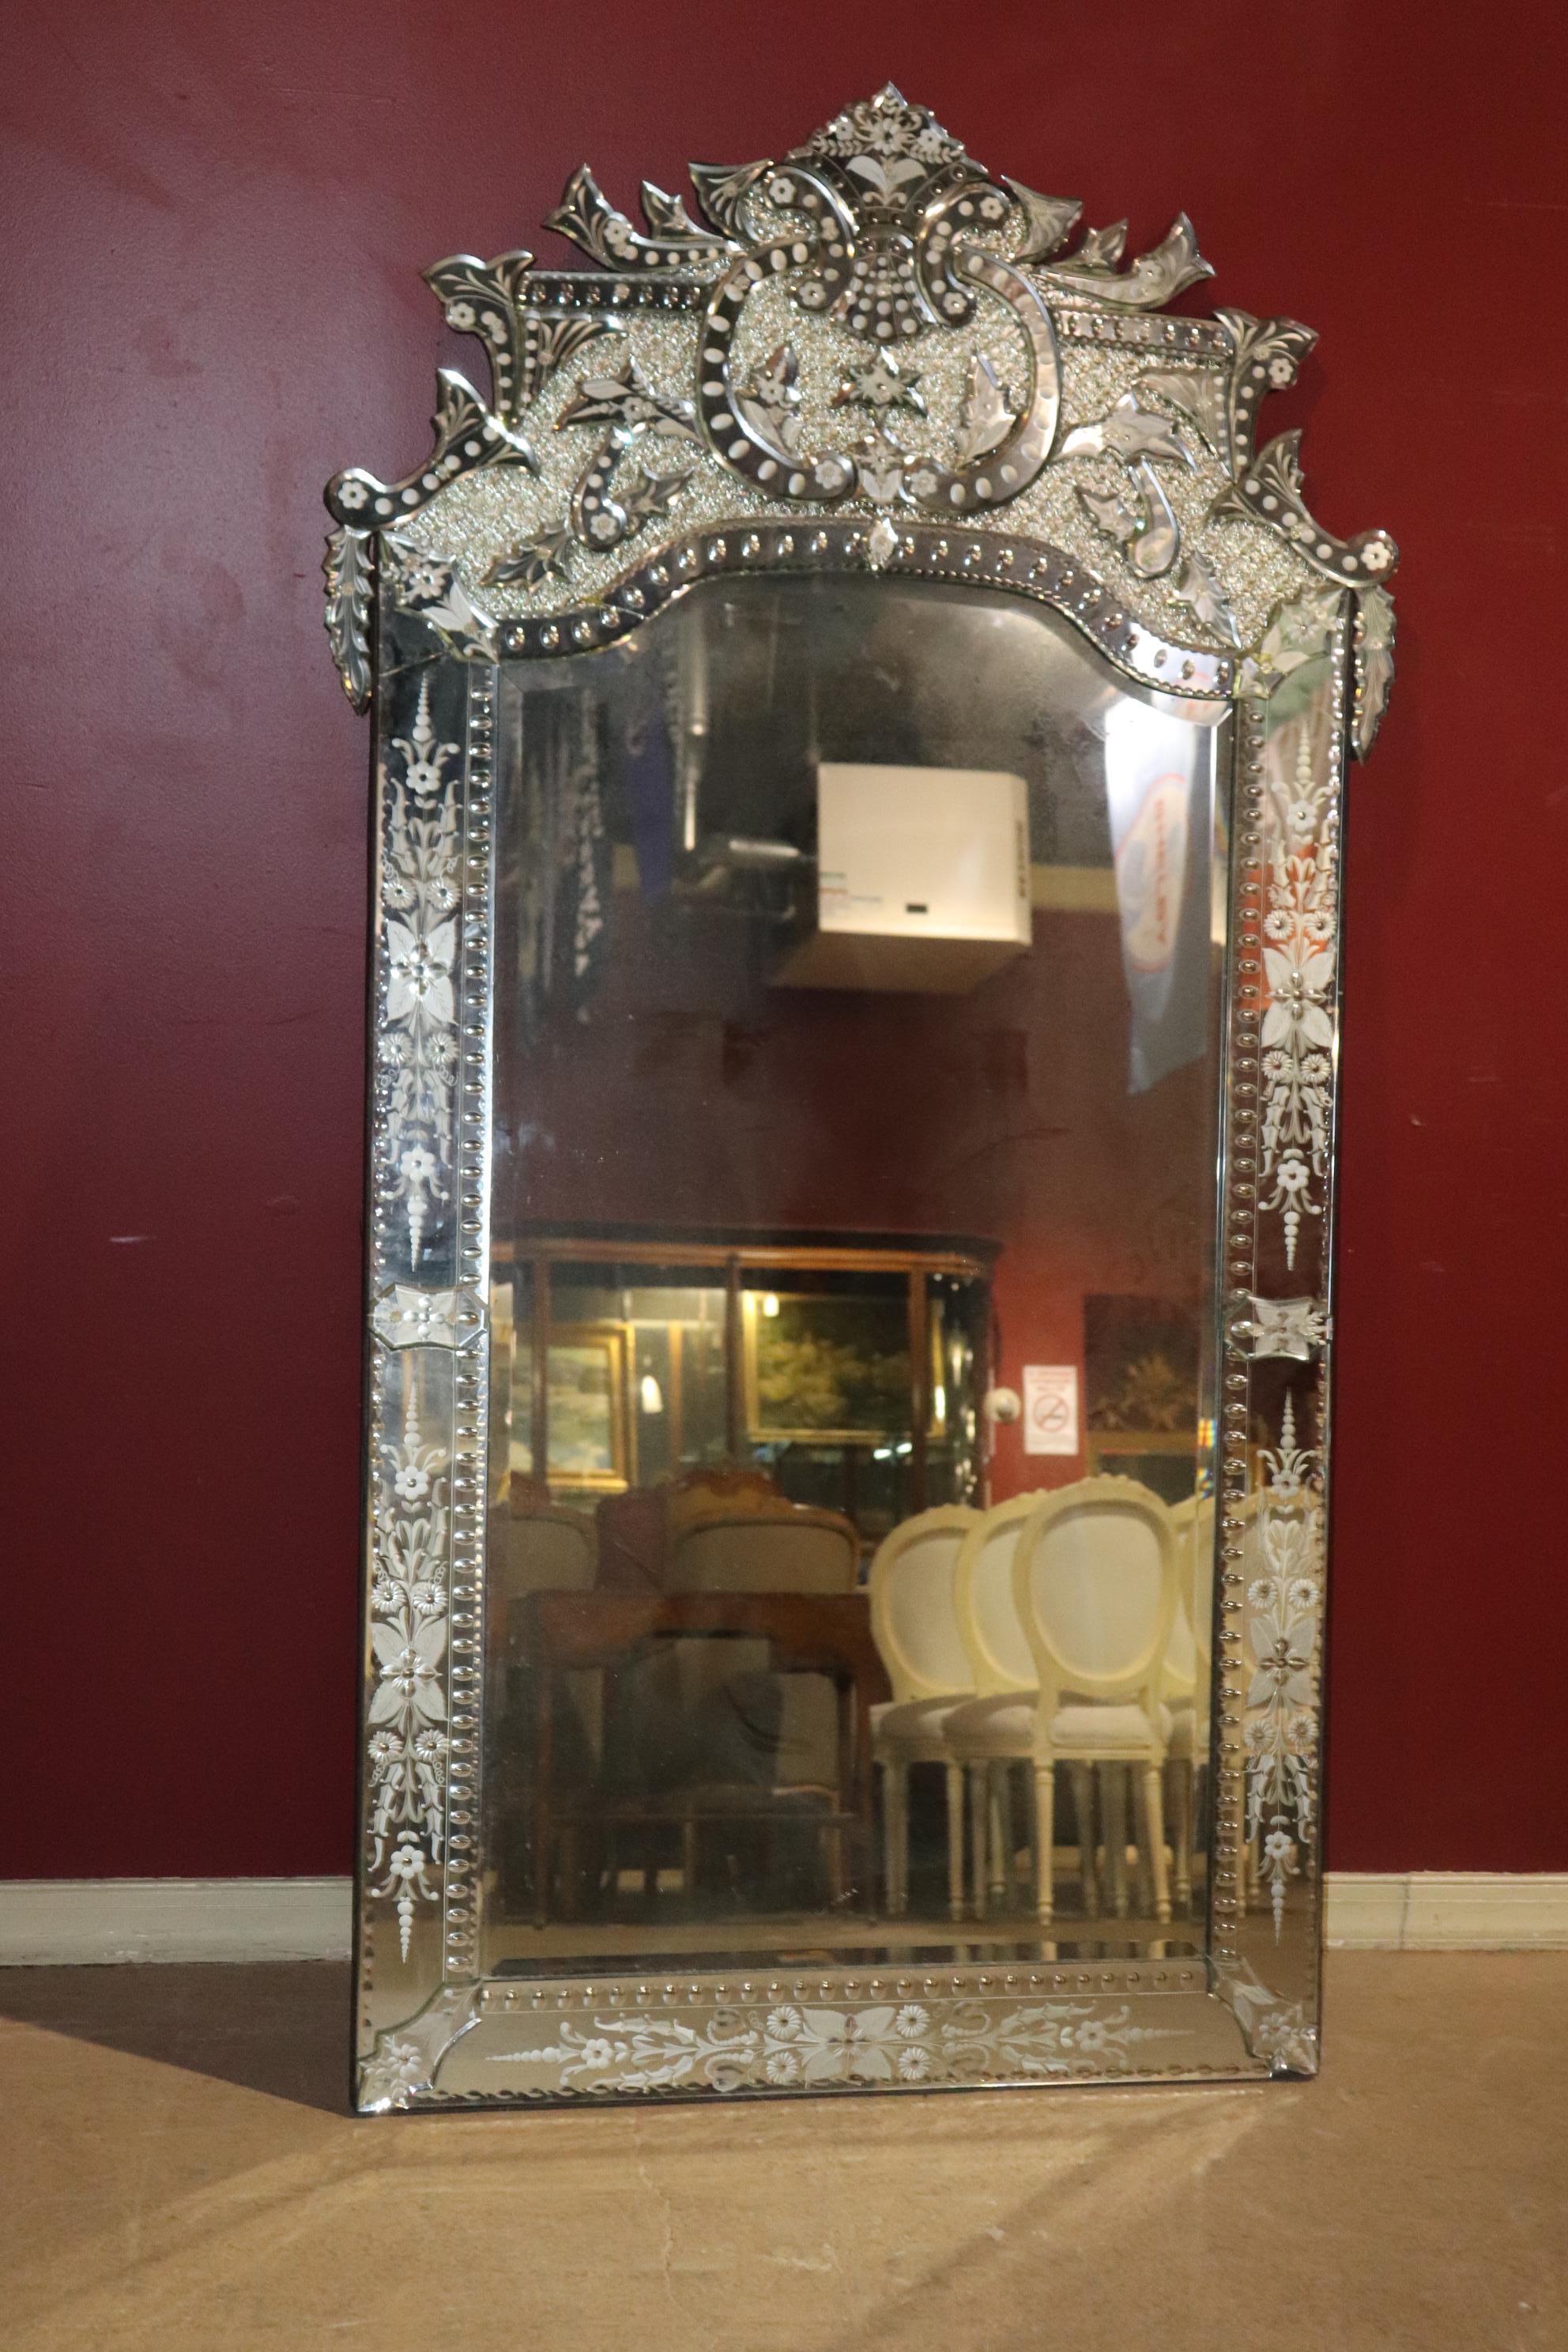 This is a fantastic Venetian mirror which while it does have some old age cracks and minor repairs like most Venetian mirrors of this era, but if properly hung in the air you won't notice these issues at all. This is a nearly 7 ft tall mirror so it